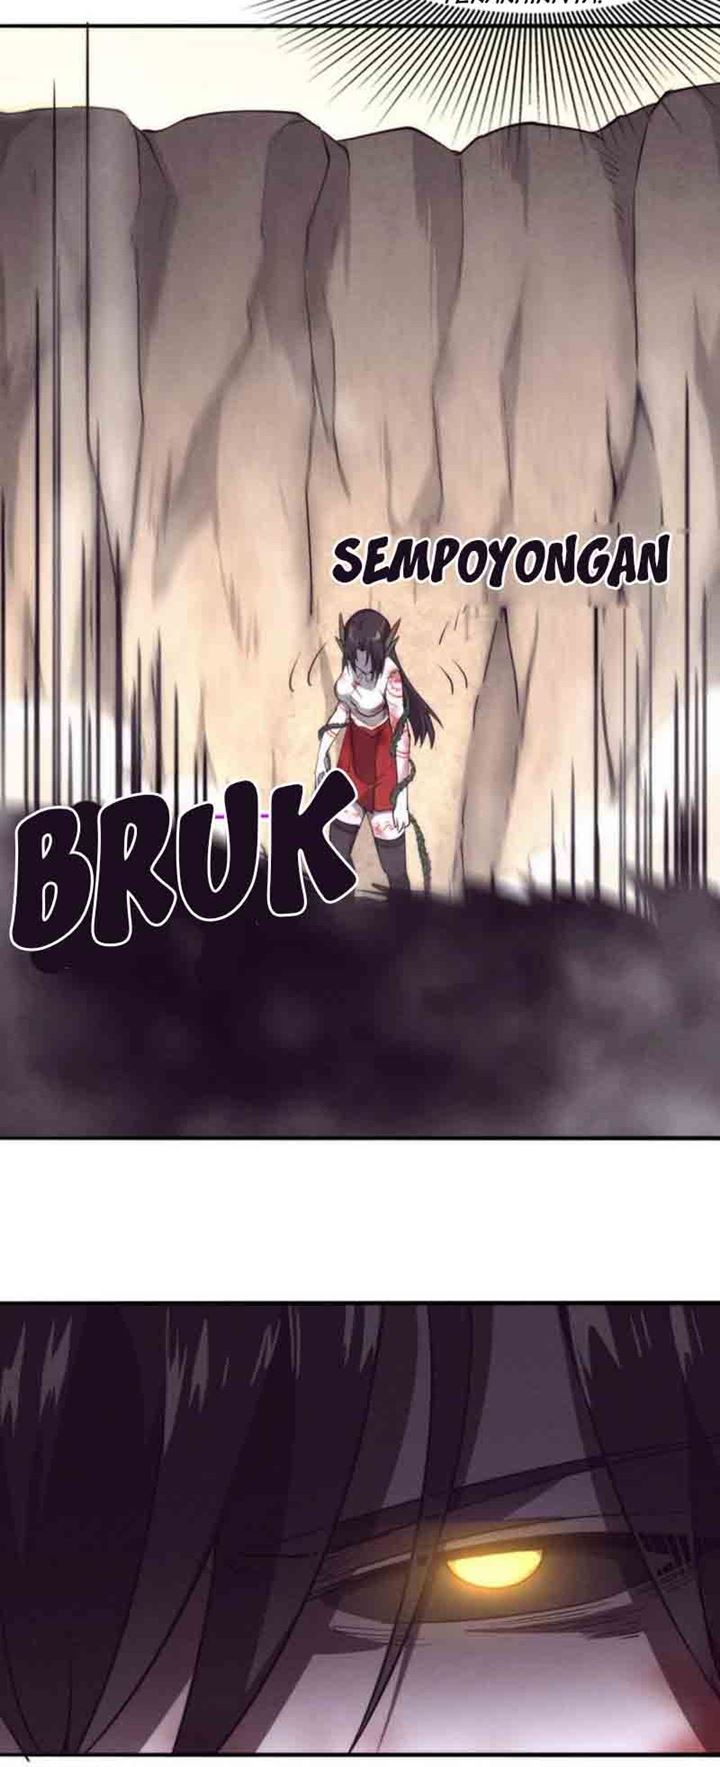 Evolution Frenzy Chapter 09 bahasa indoensia